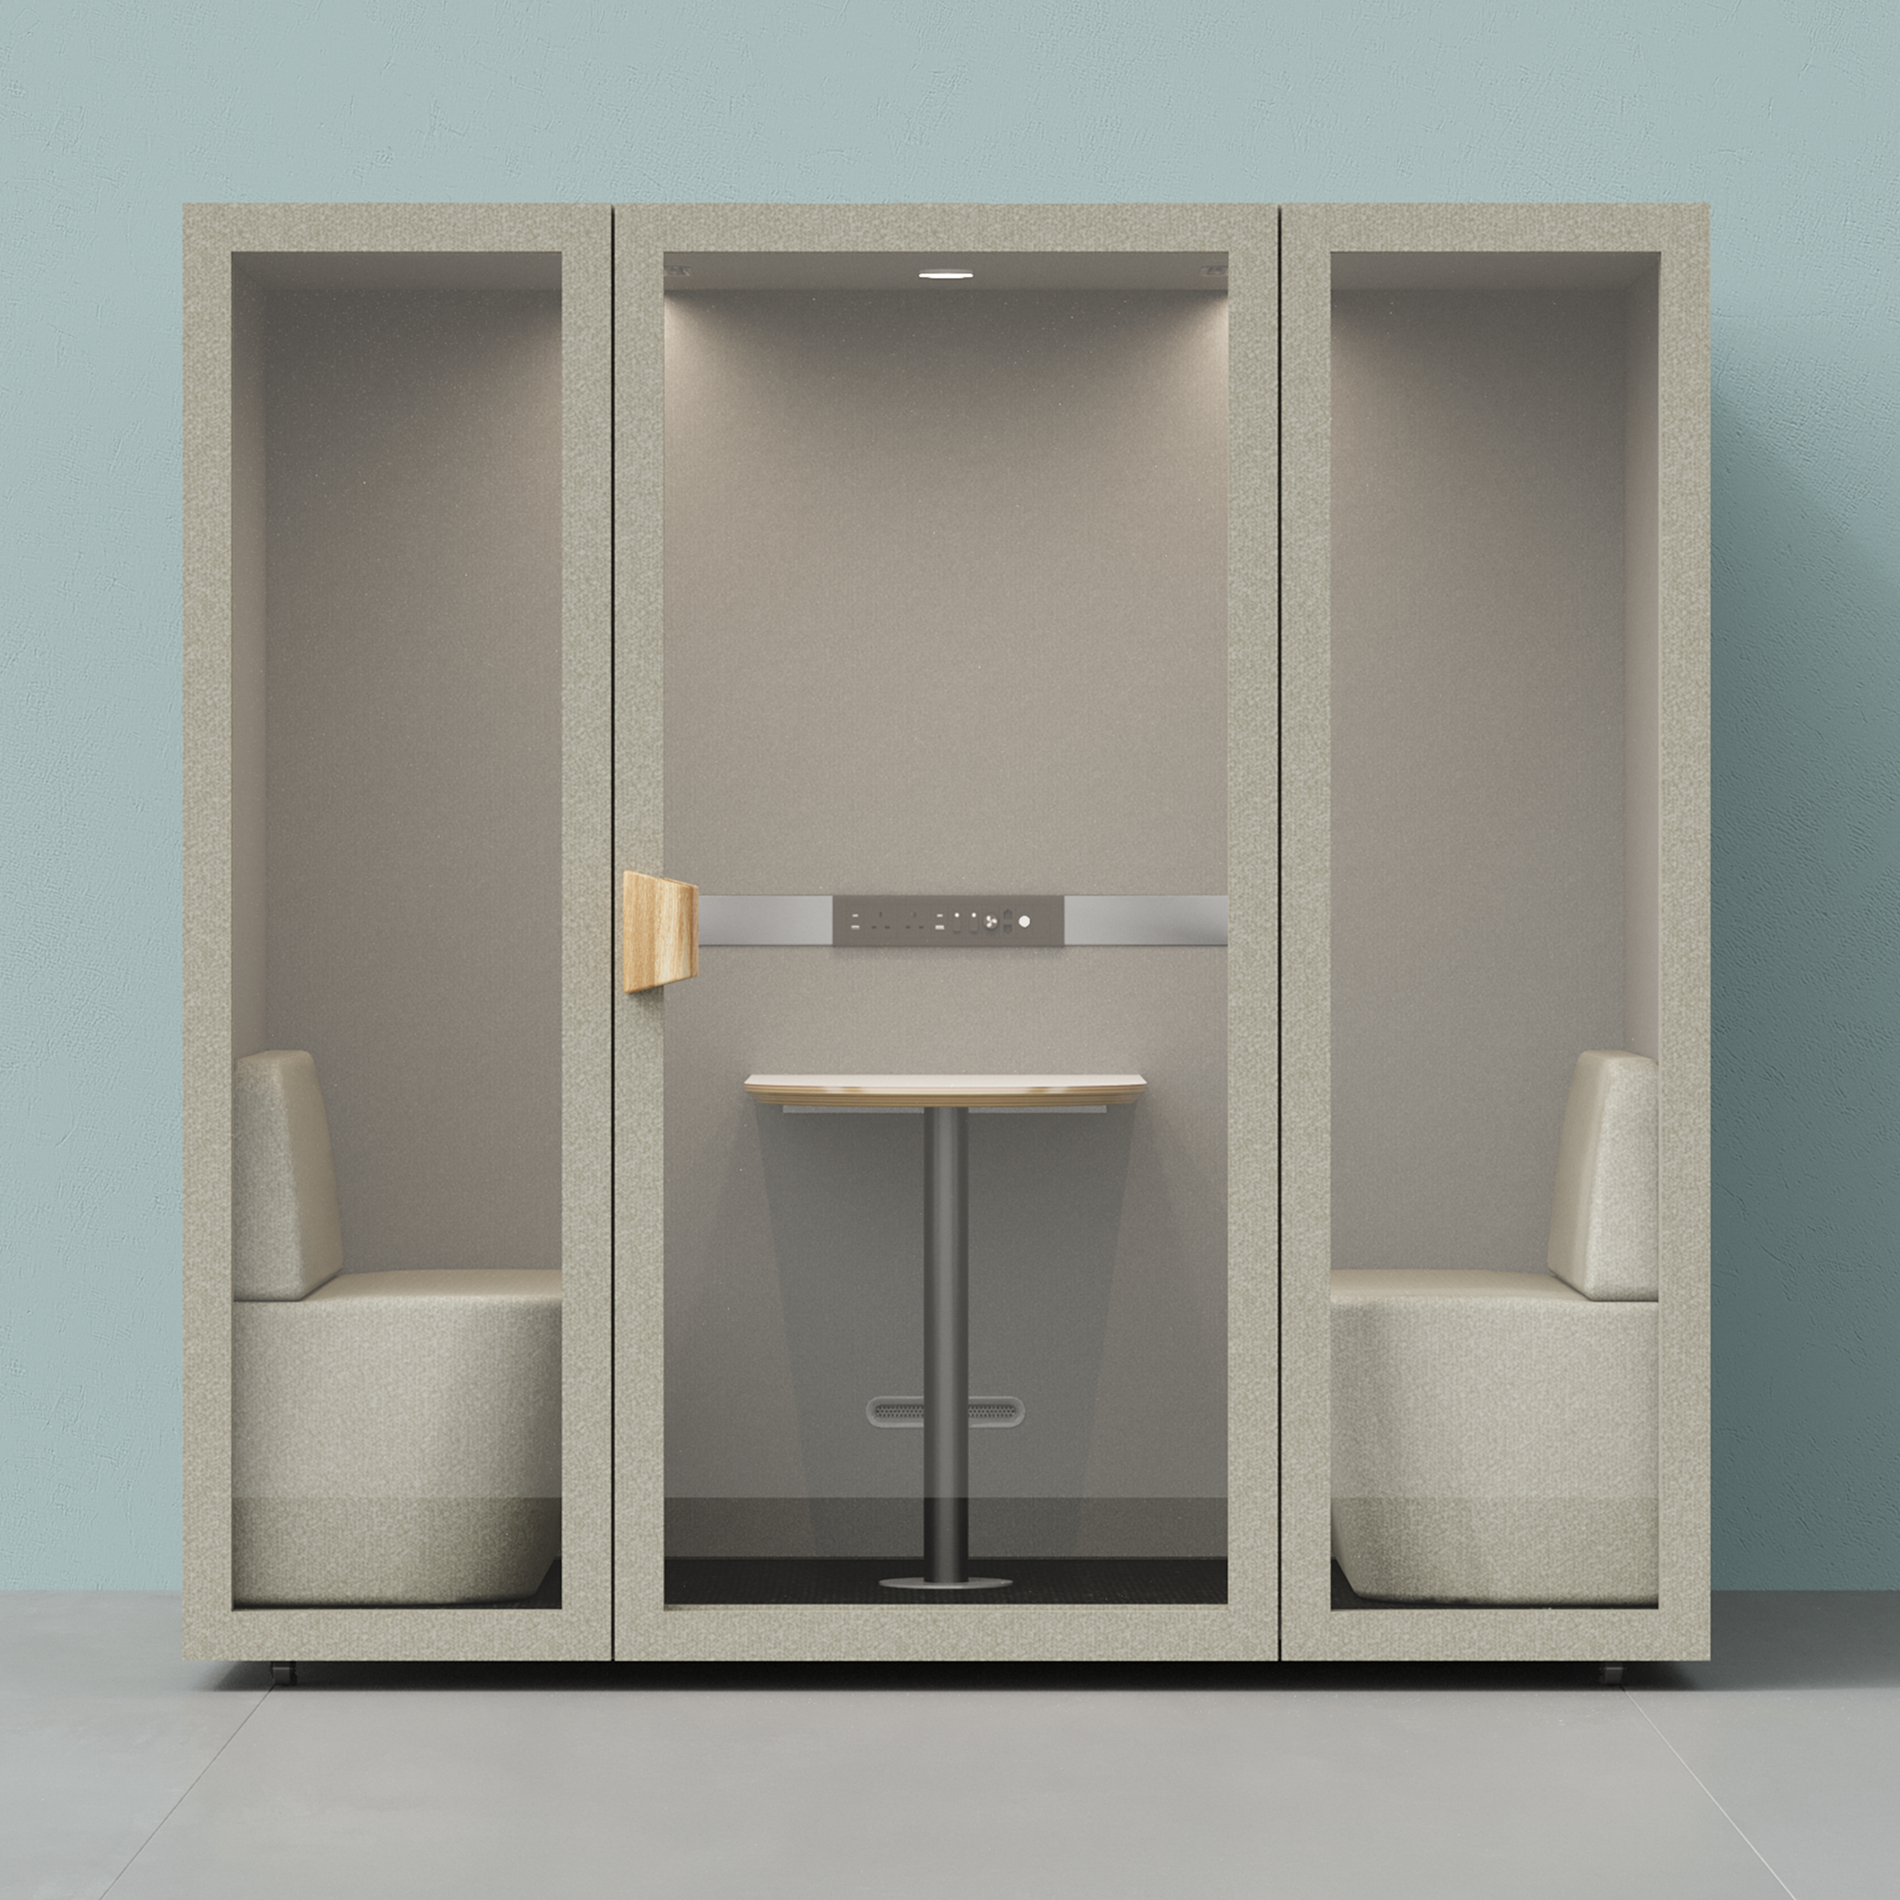 2 - 4 Person Meeting BoothFolio Beige / Furniture As Per Images